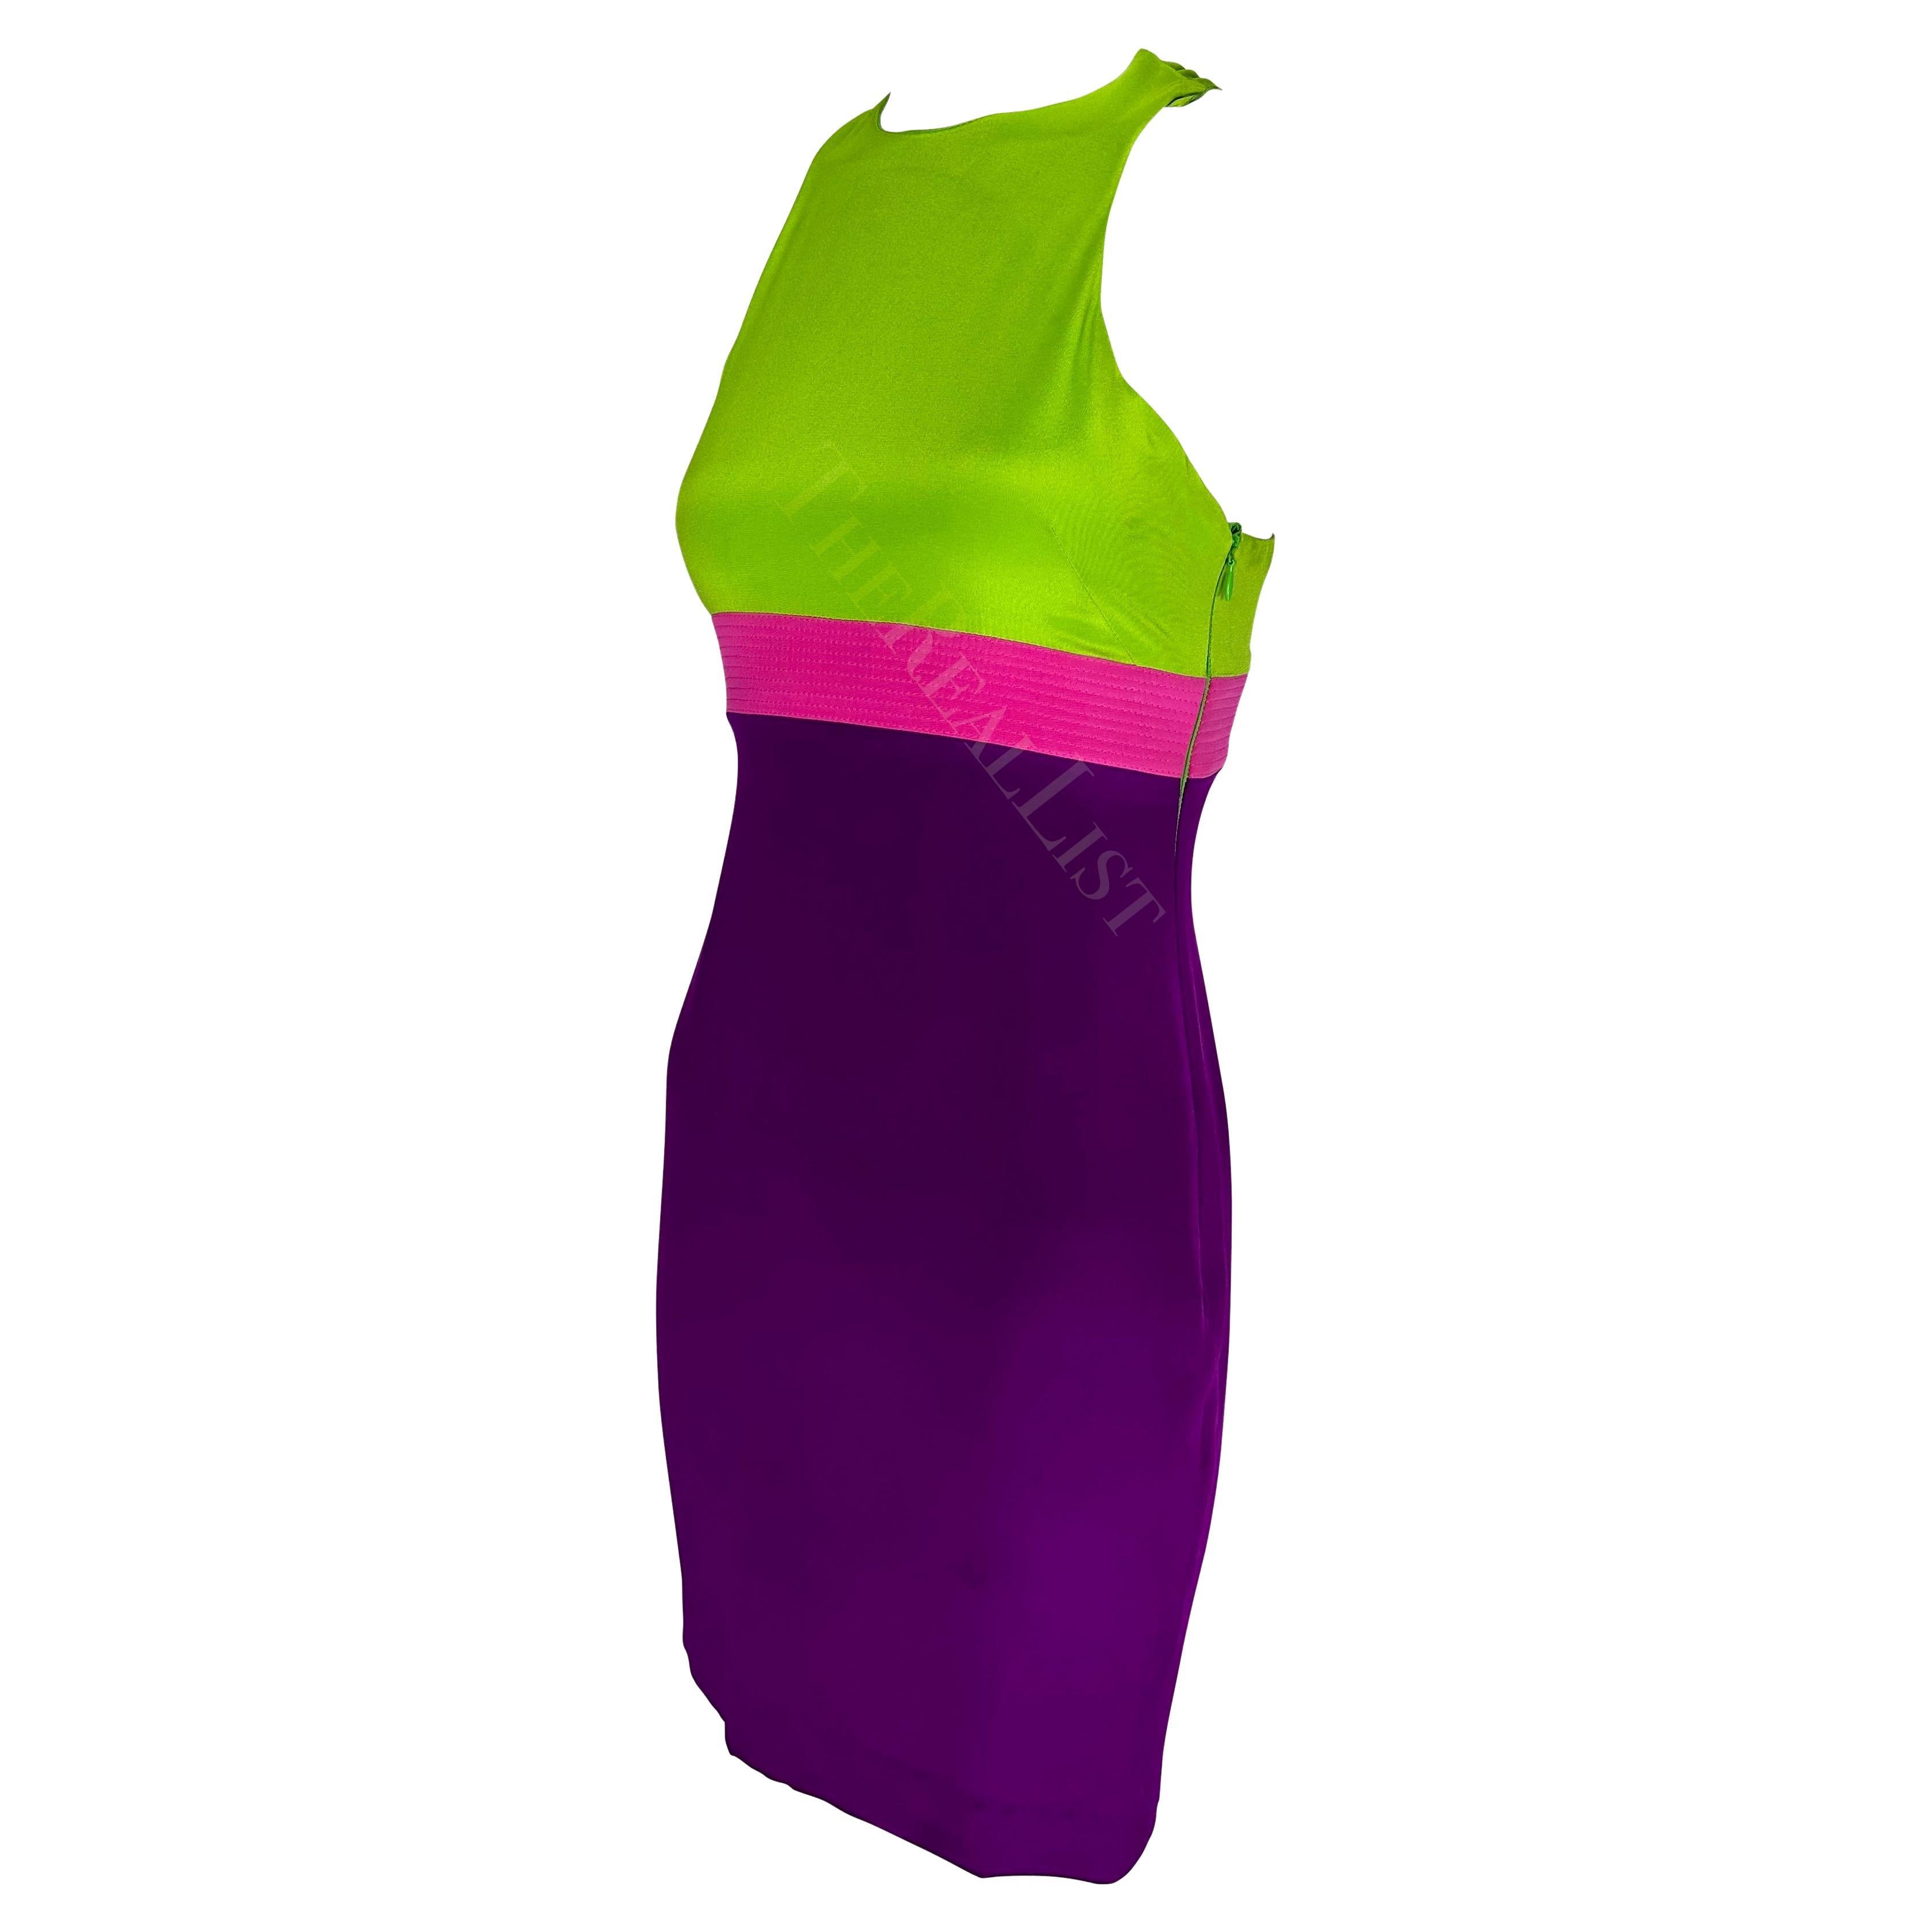 S/S 2003 Gianni Versace by Donatella Versace Purple/Green Colorblock Halter Mini In Good Condition For Sale In West Hollywood, CA